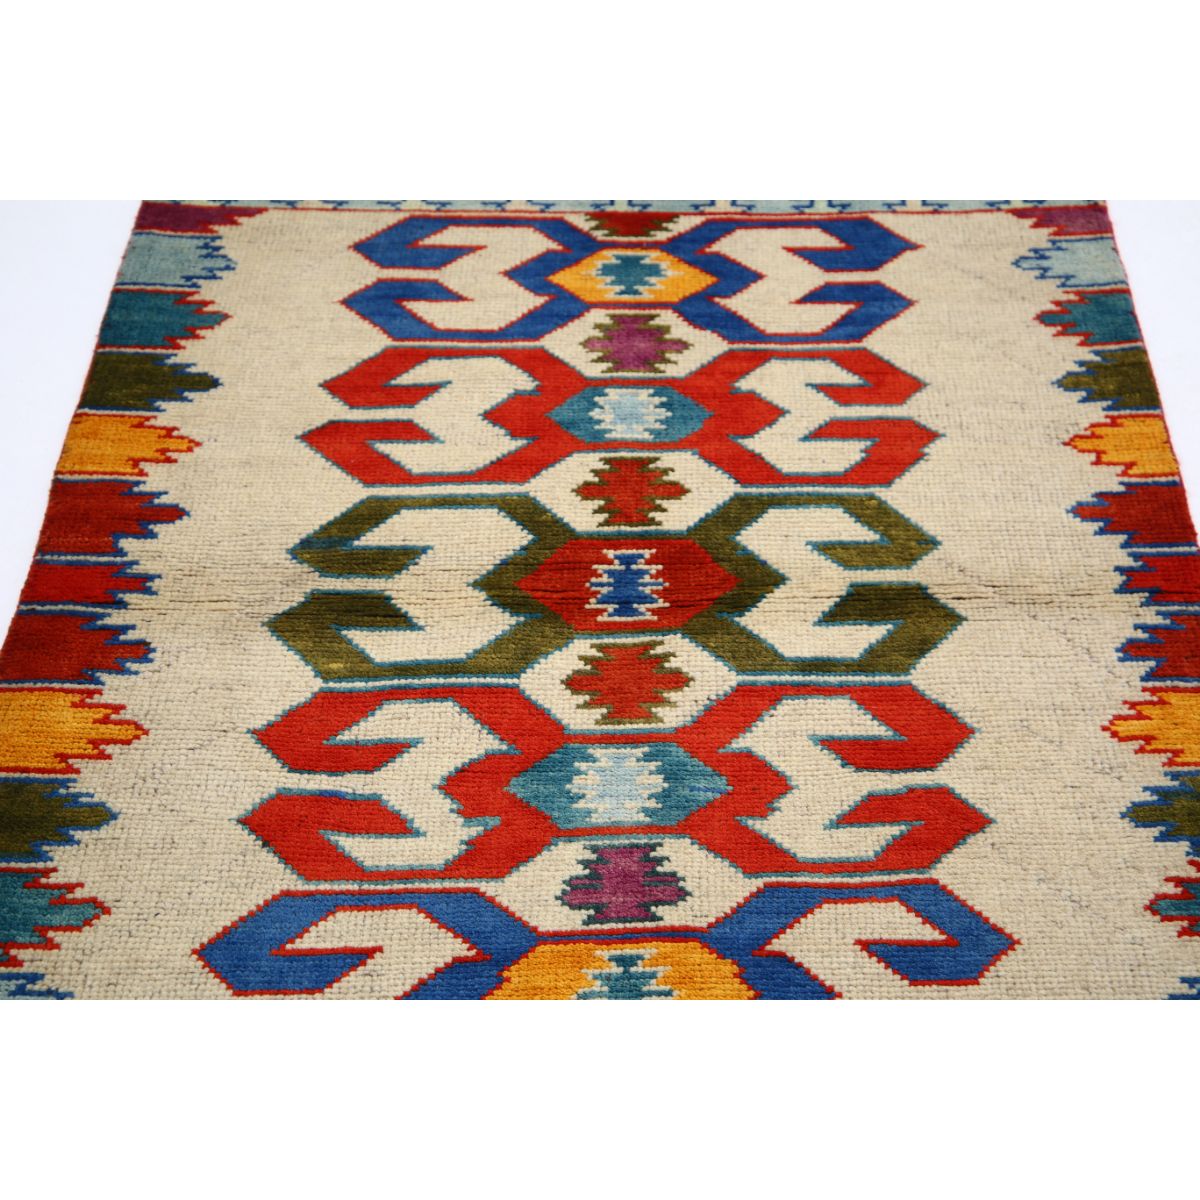 Revival 3' 5" X 4' 8" Wool Hand Knotted Rug